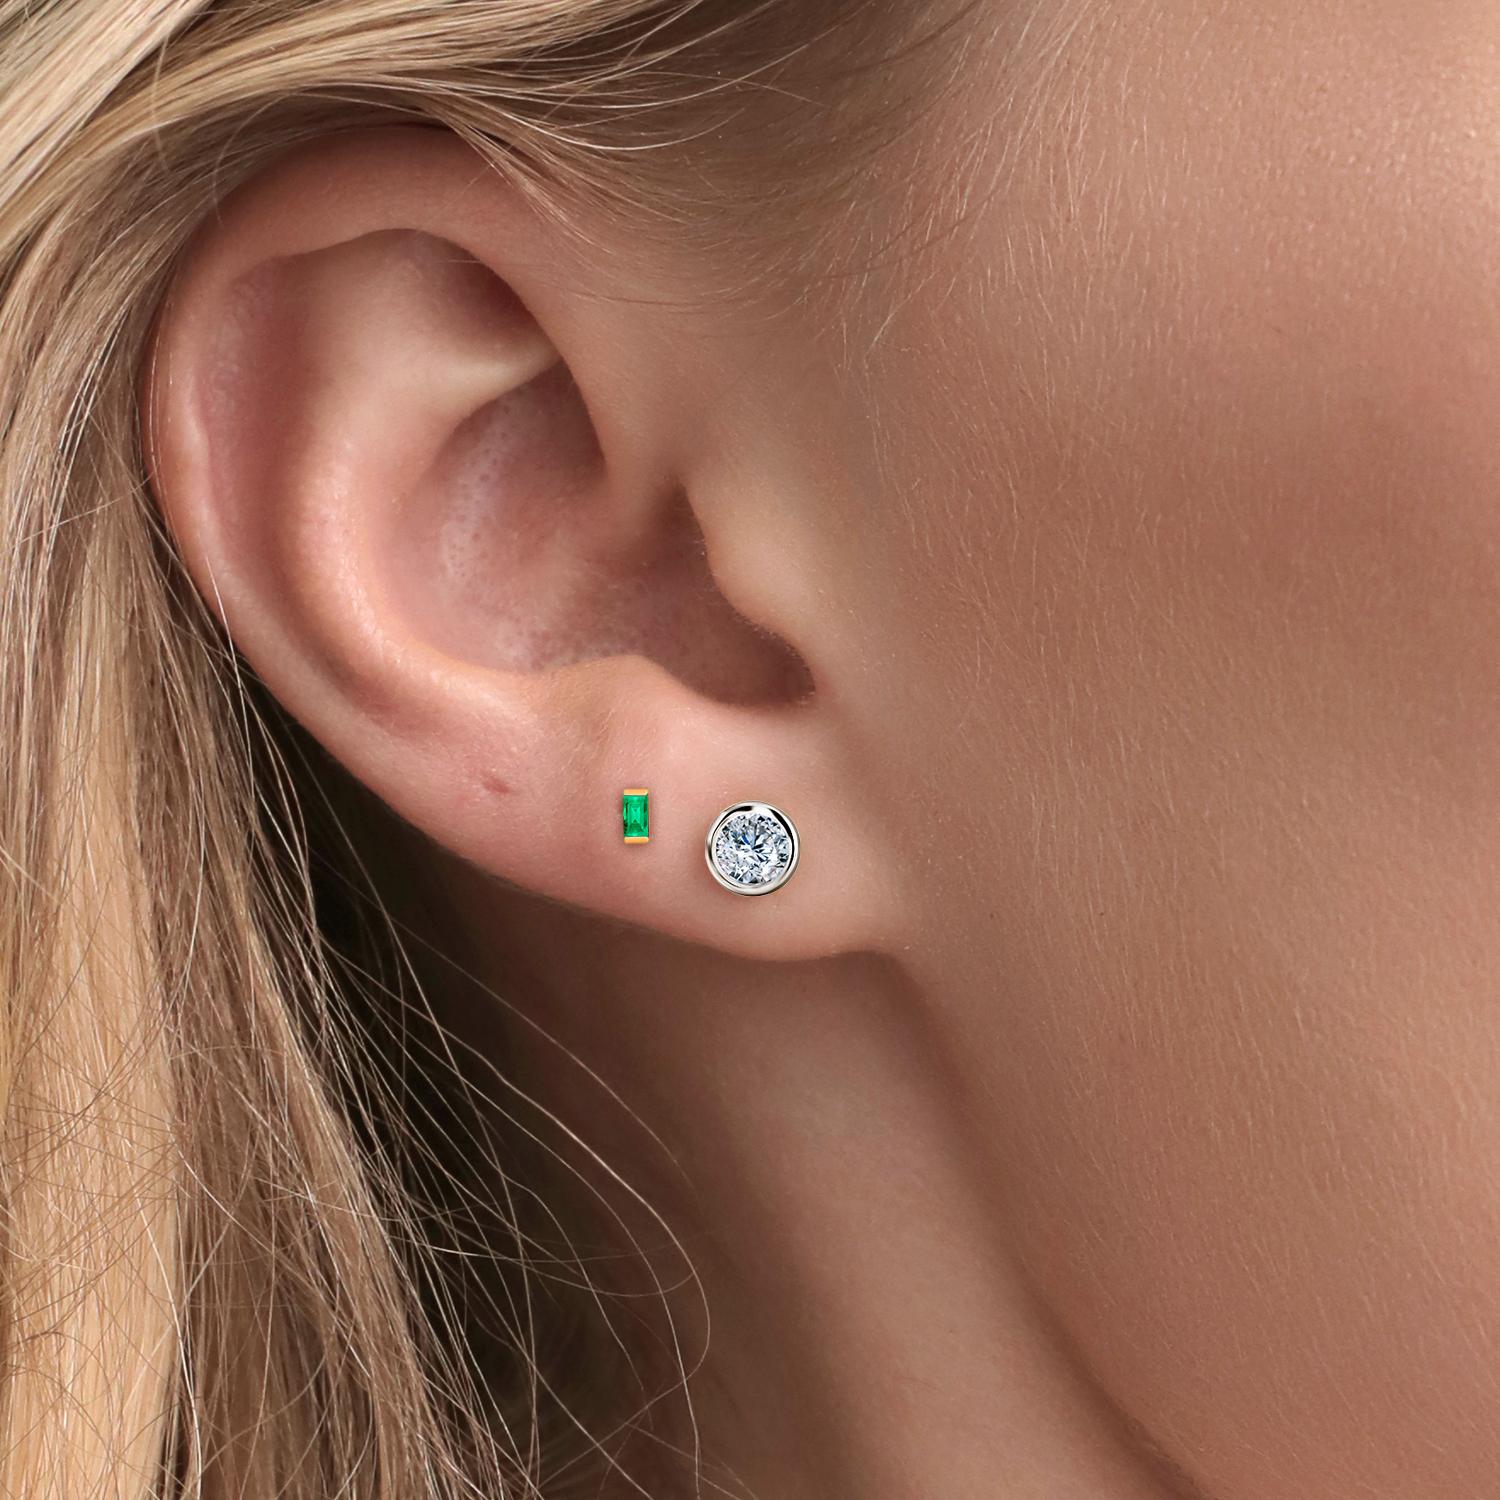 stud earrings for second and third hole